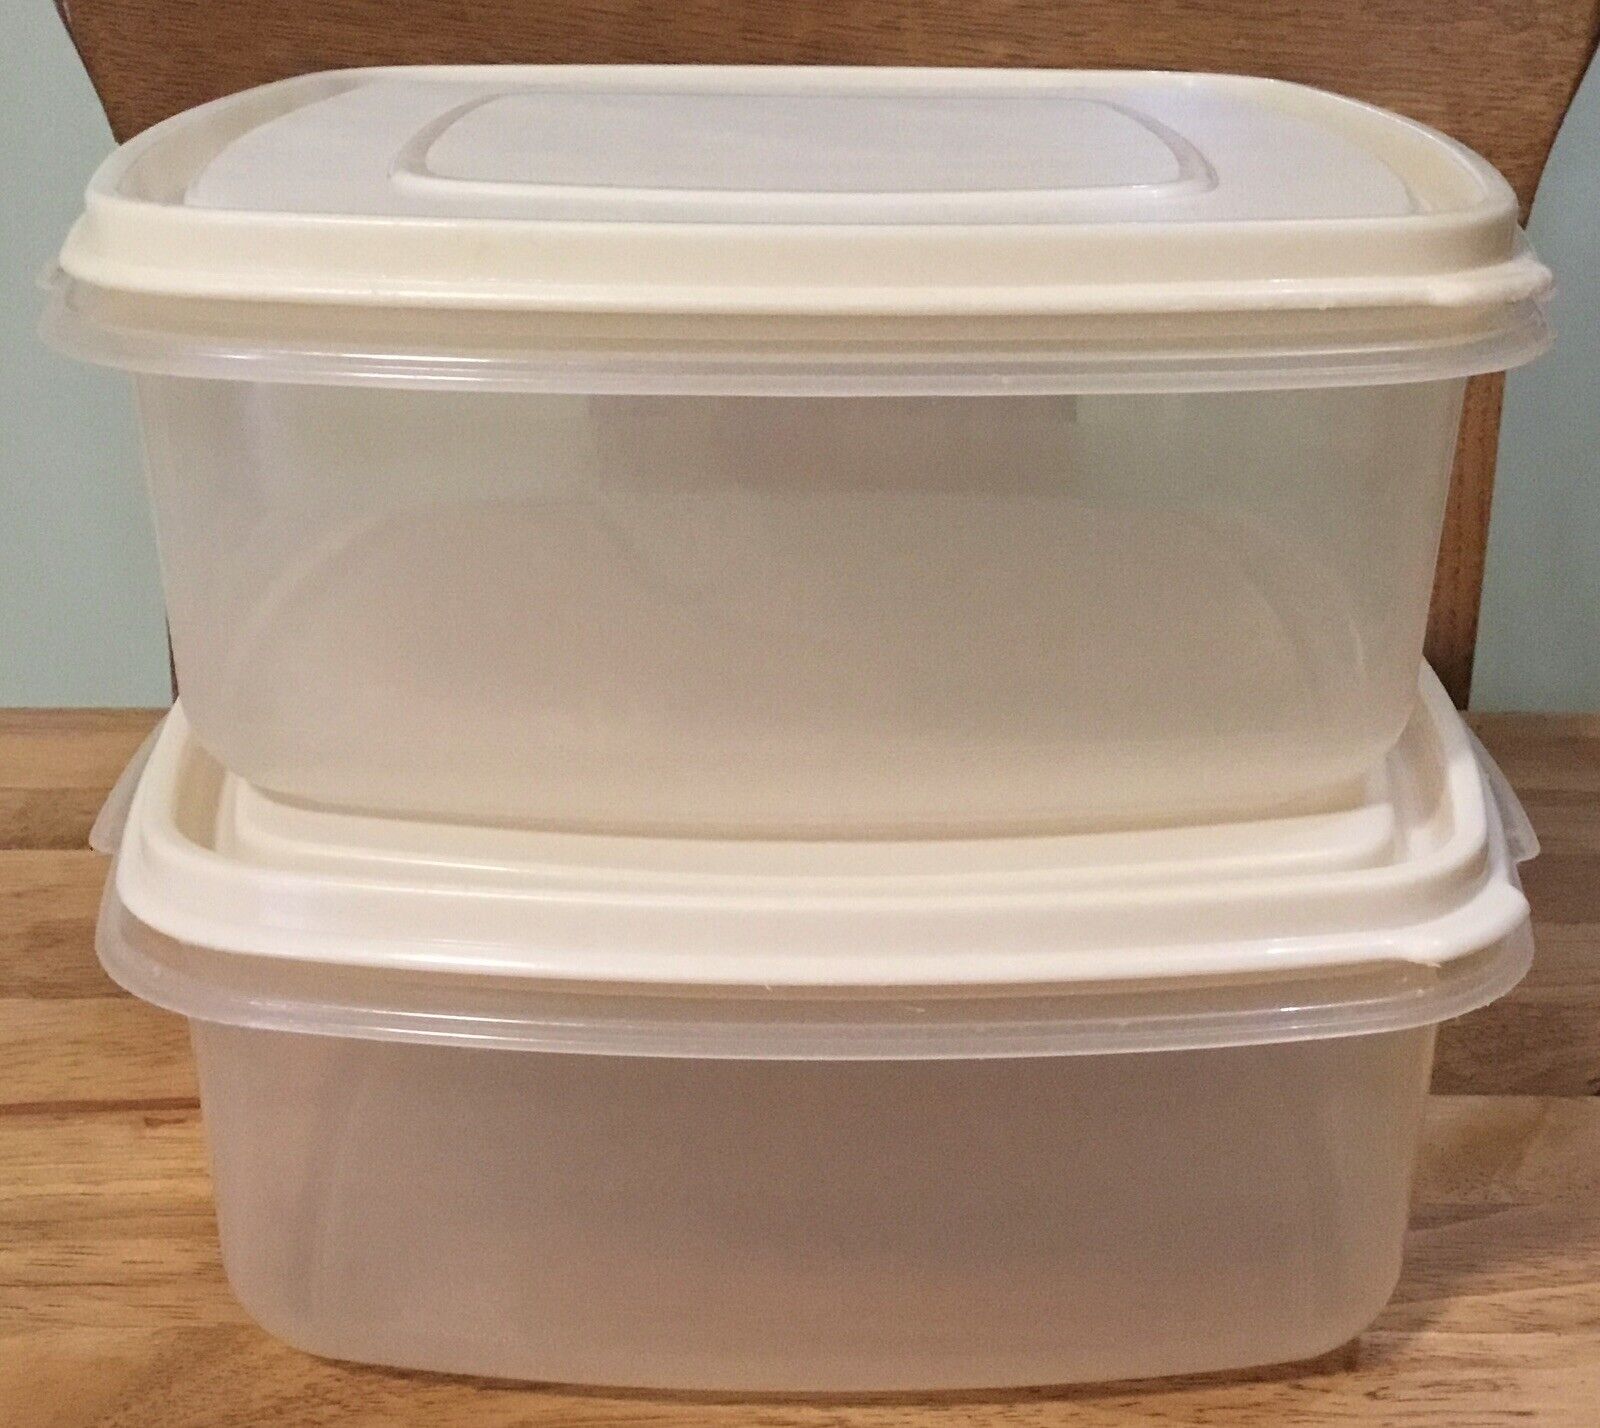 (2) Rubbermaid Servin’ Savers~ 10 CUP ~ 8” Sq. Storage Containers~ w/Almond Lids